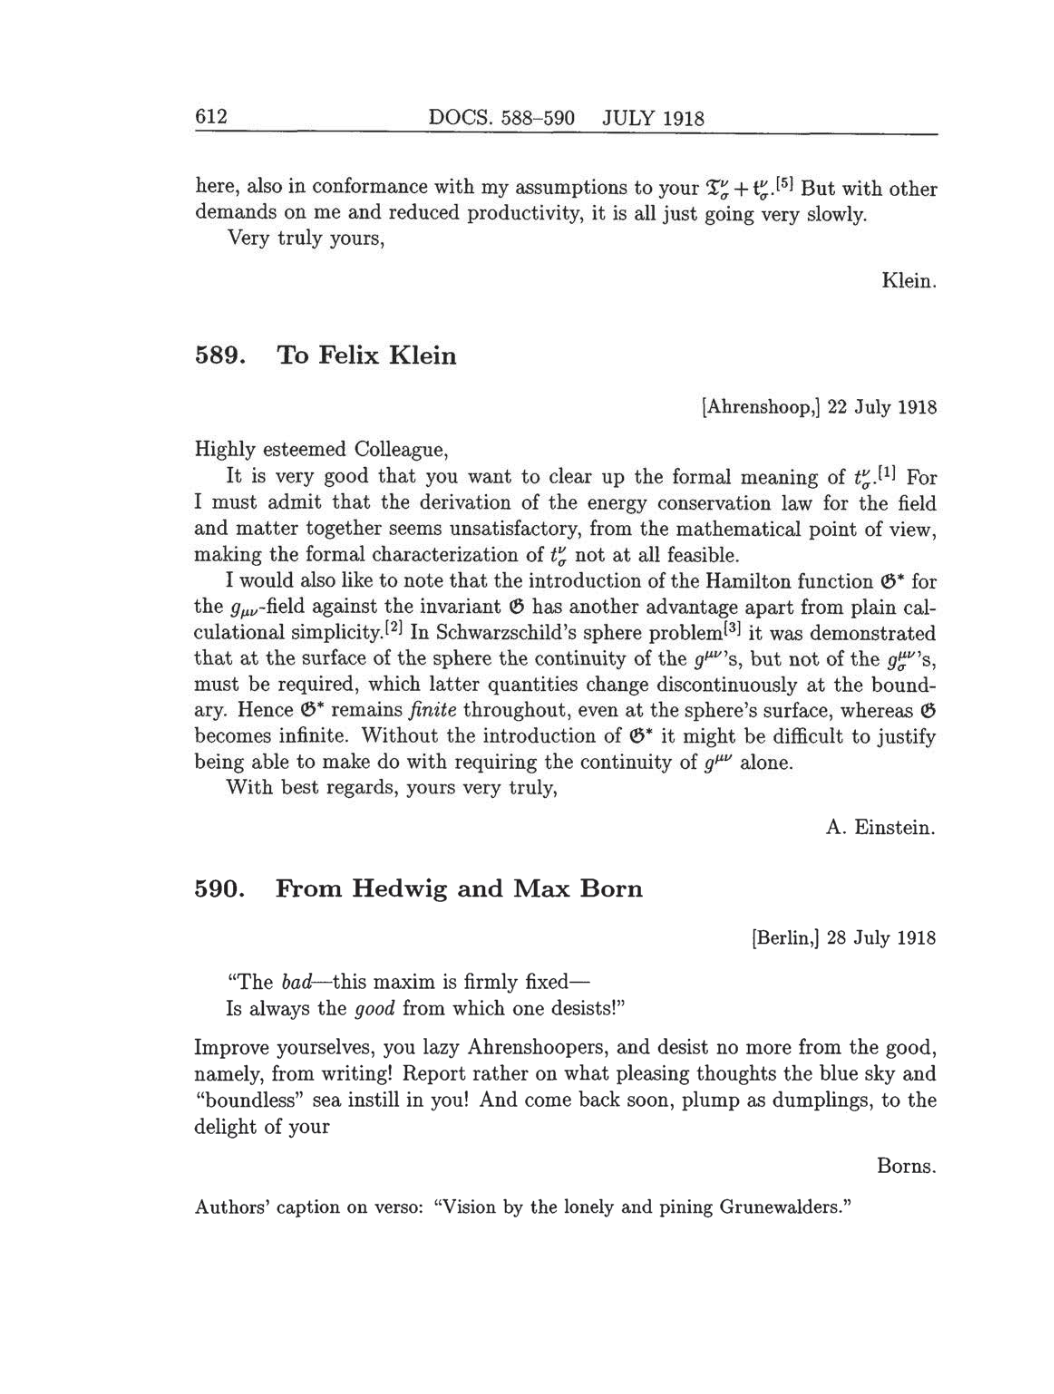 Volume 8: The Berlin Years: Correspondence, 1914-1918 (English translation supplement) page 612